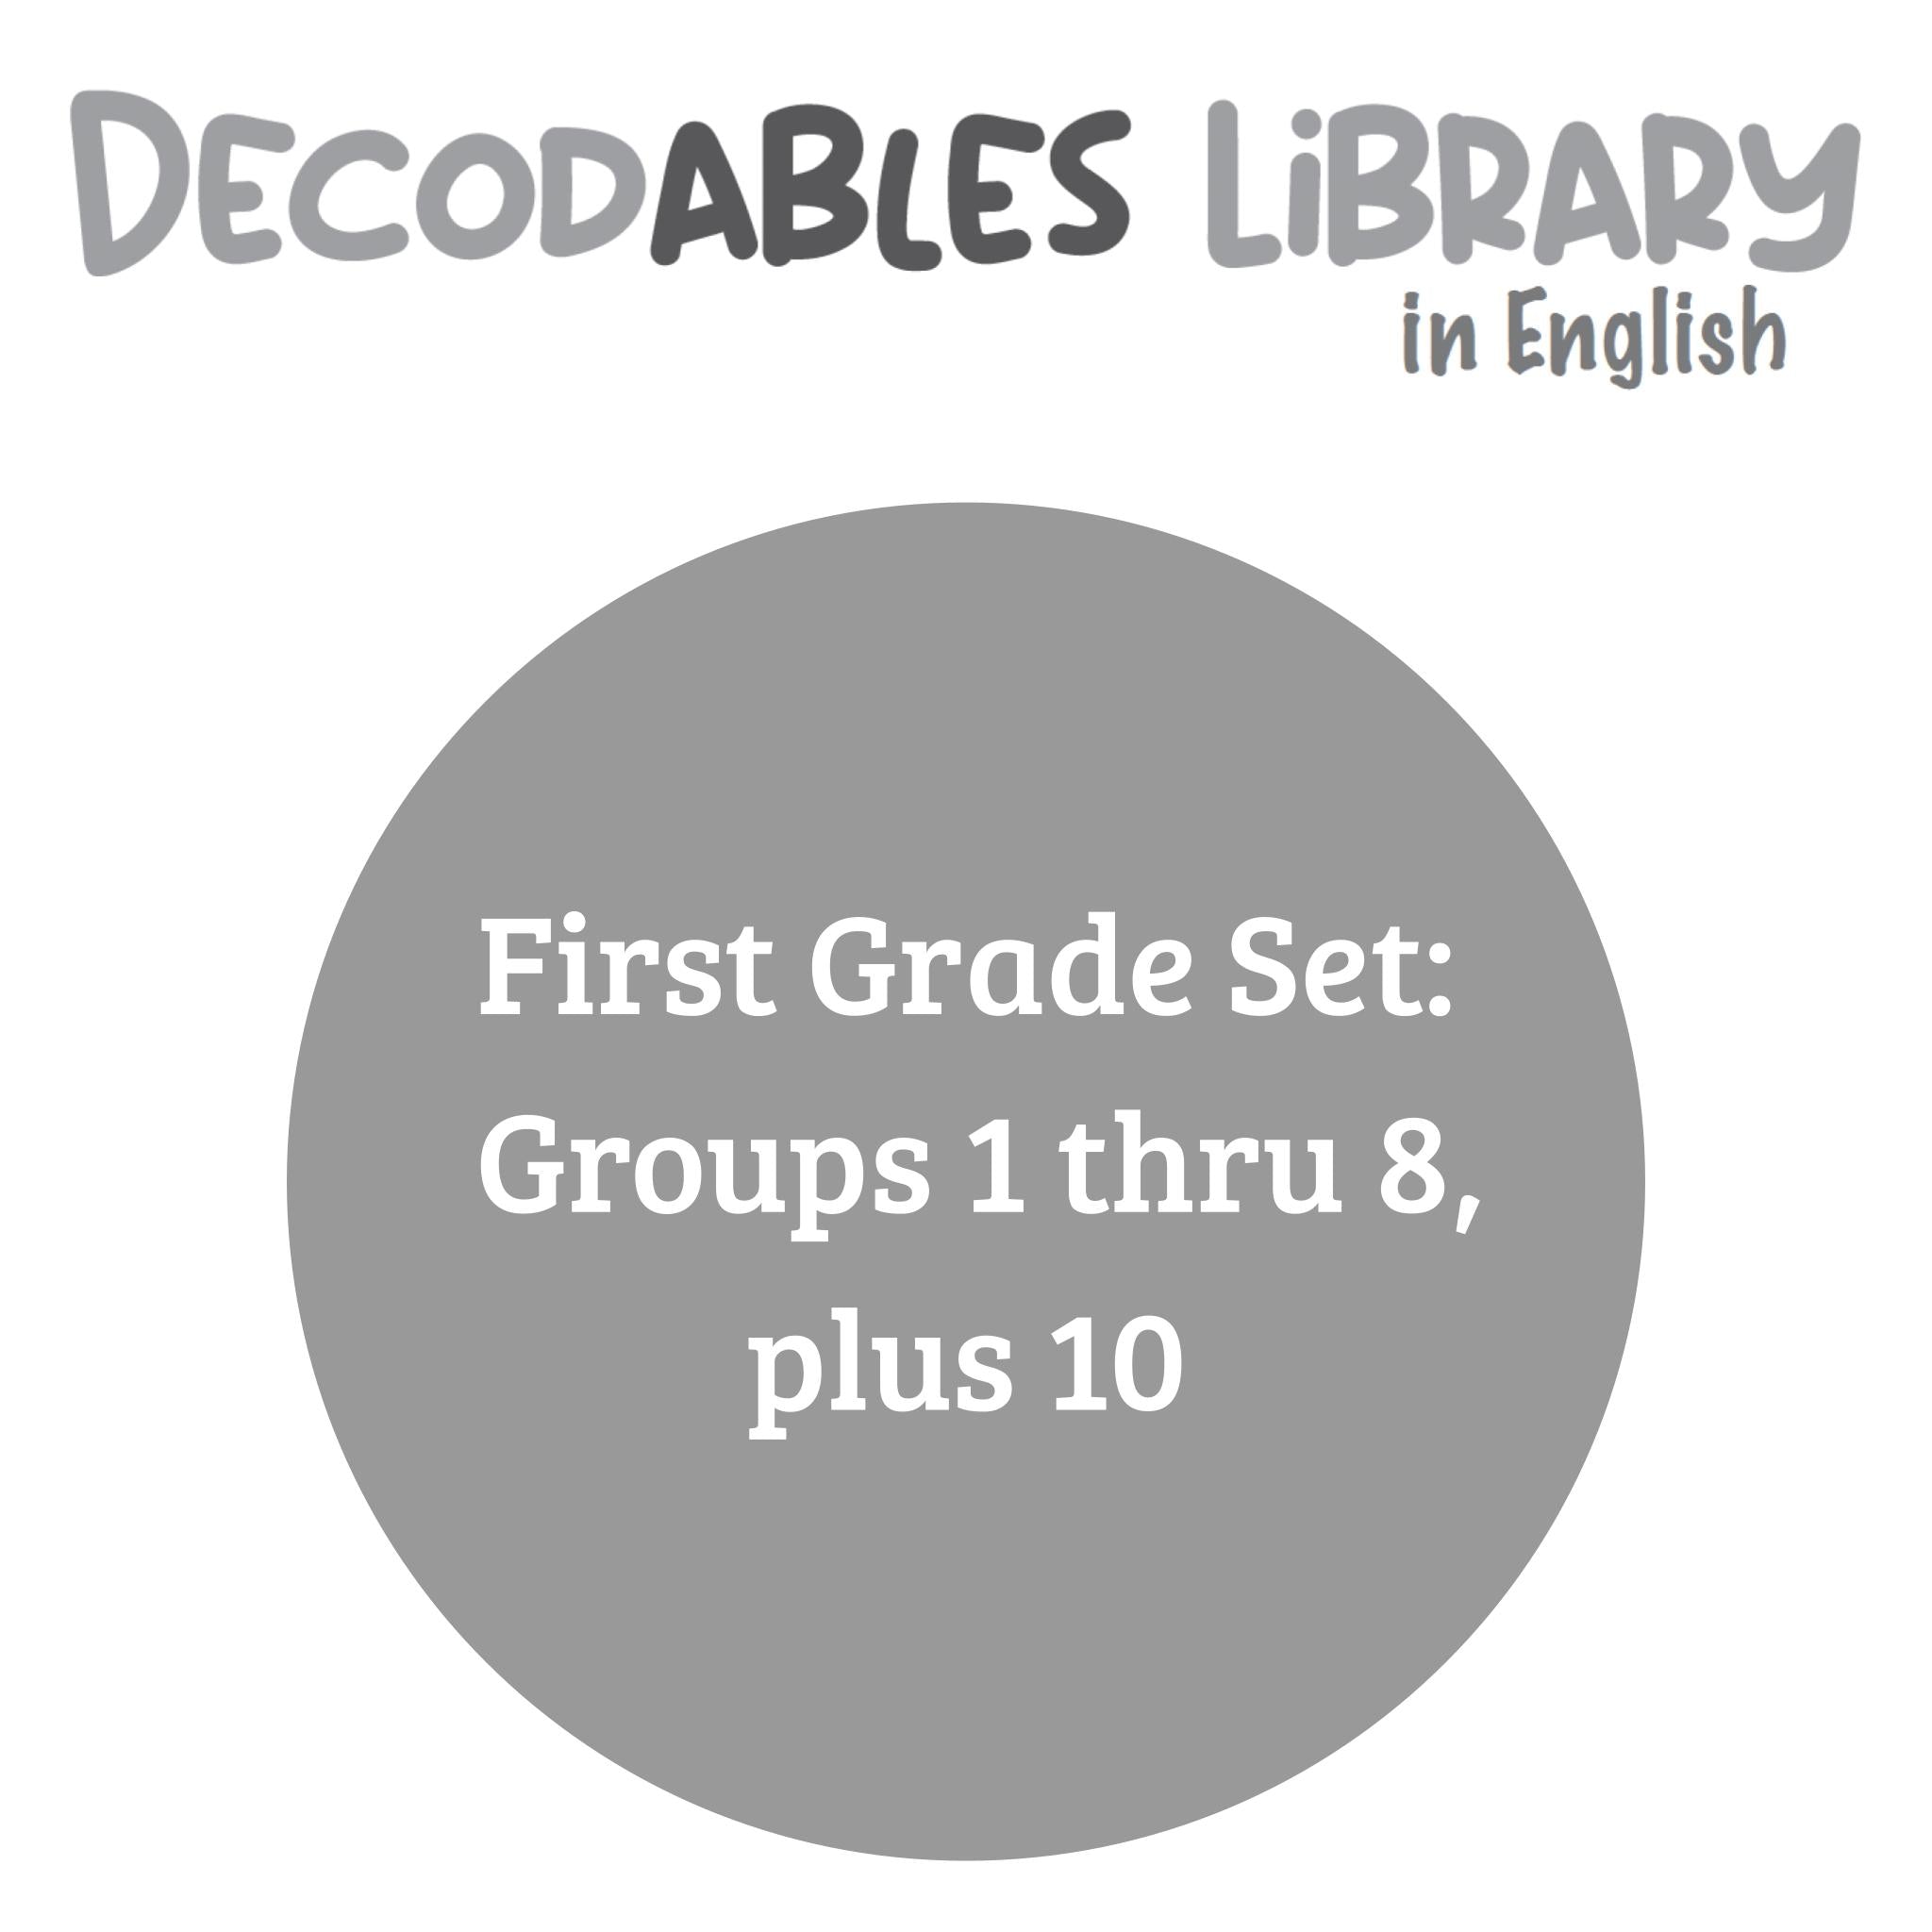 English Decodables Library - First Grade Set (Includes Groups 1 thru 8, plus 10)